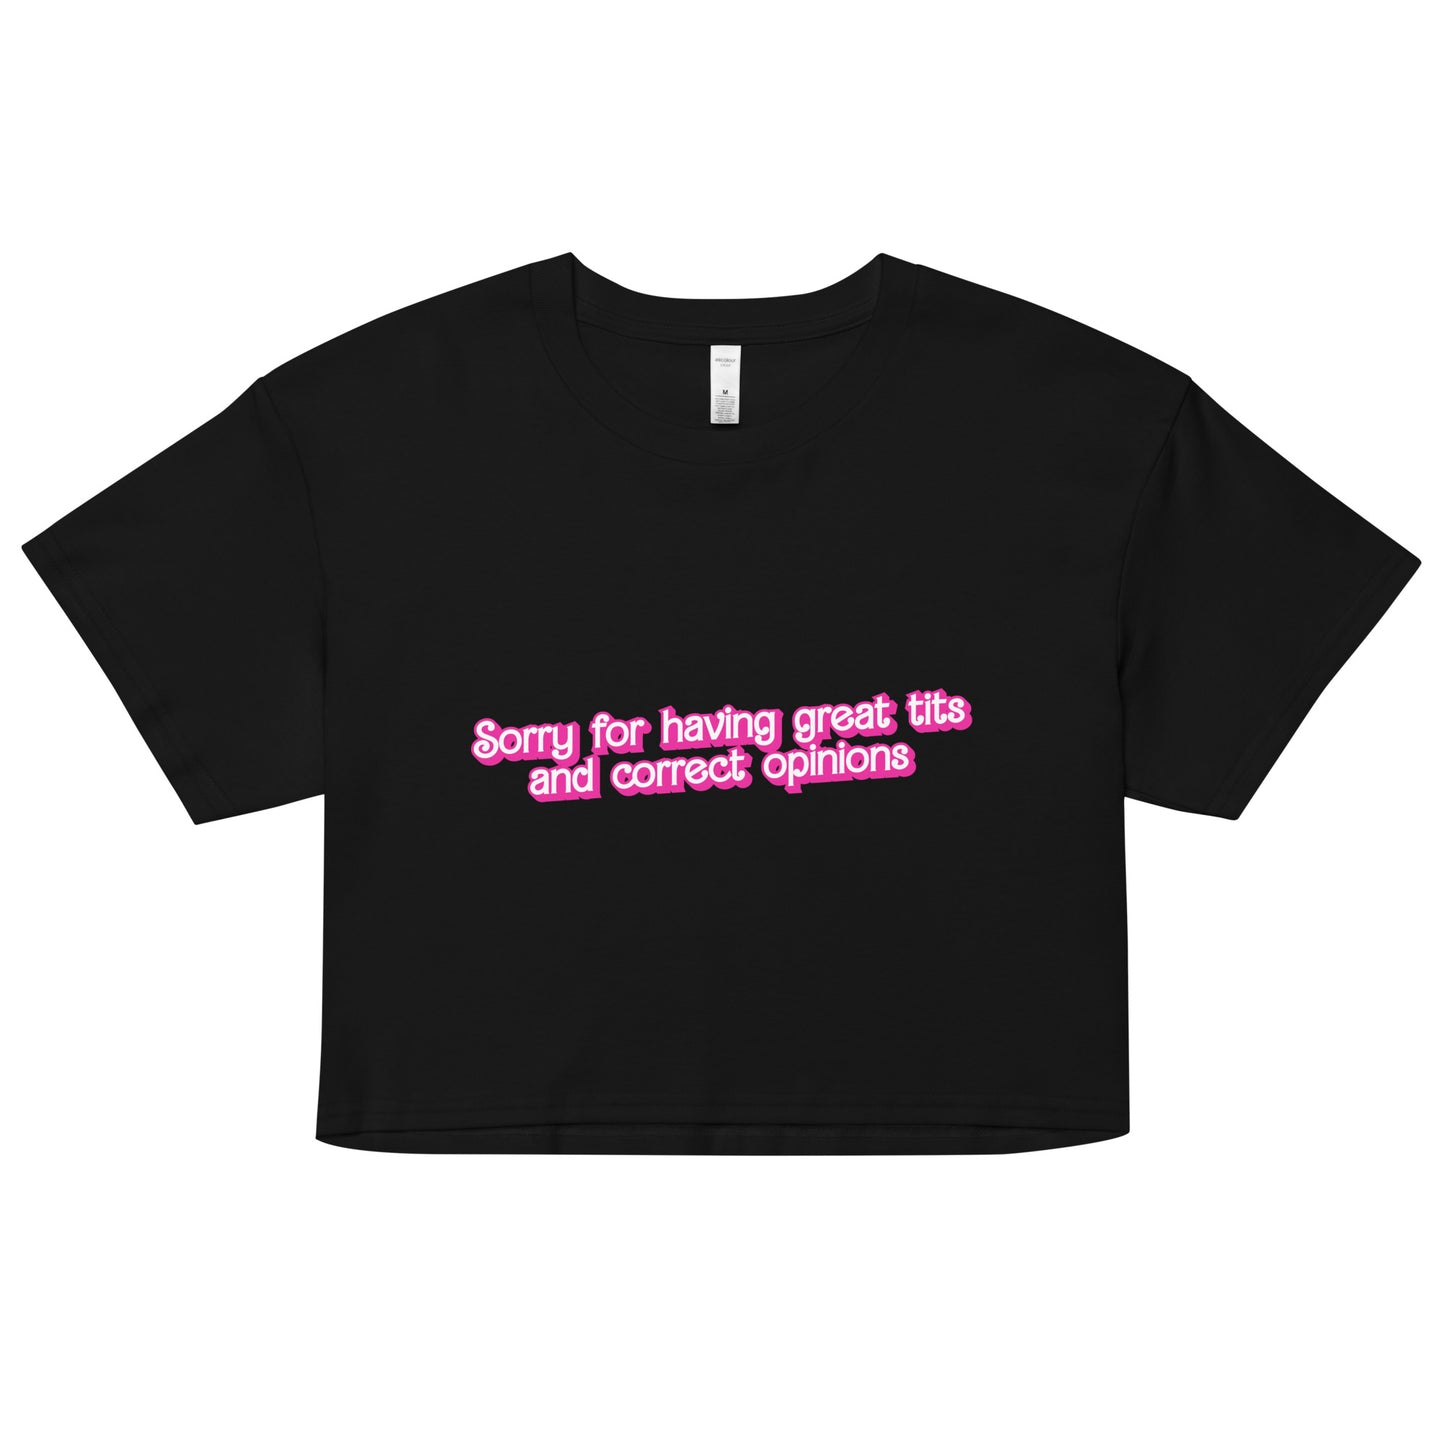 Great Tits and Correct Opinions (Pink Font) crop top